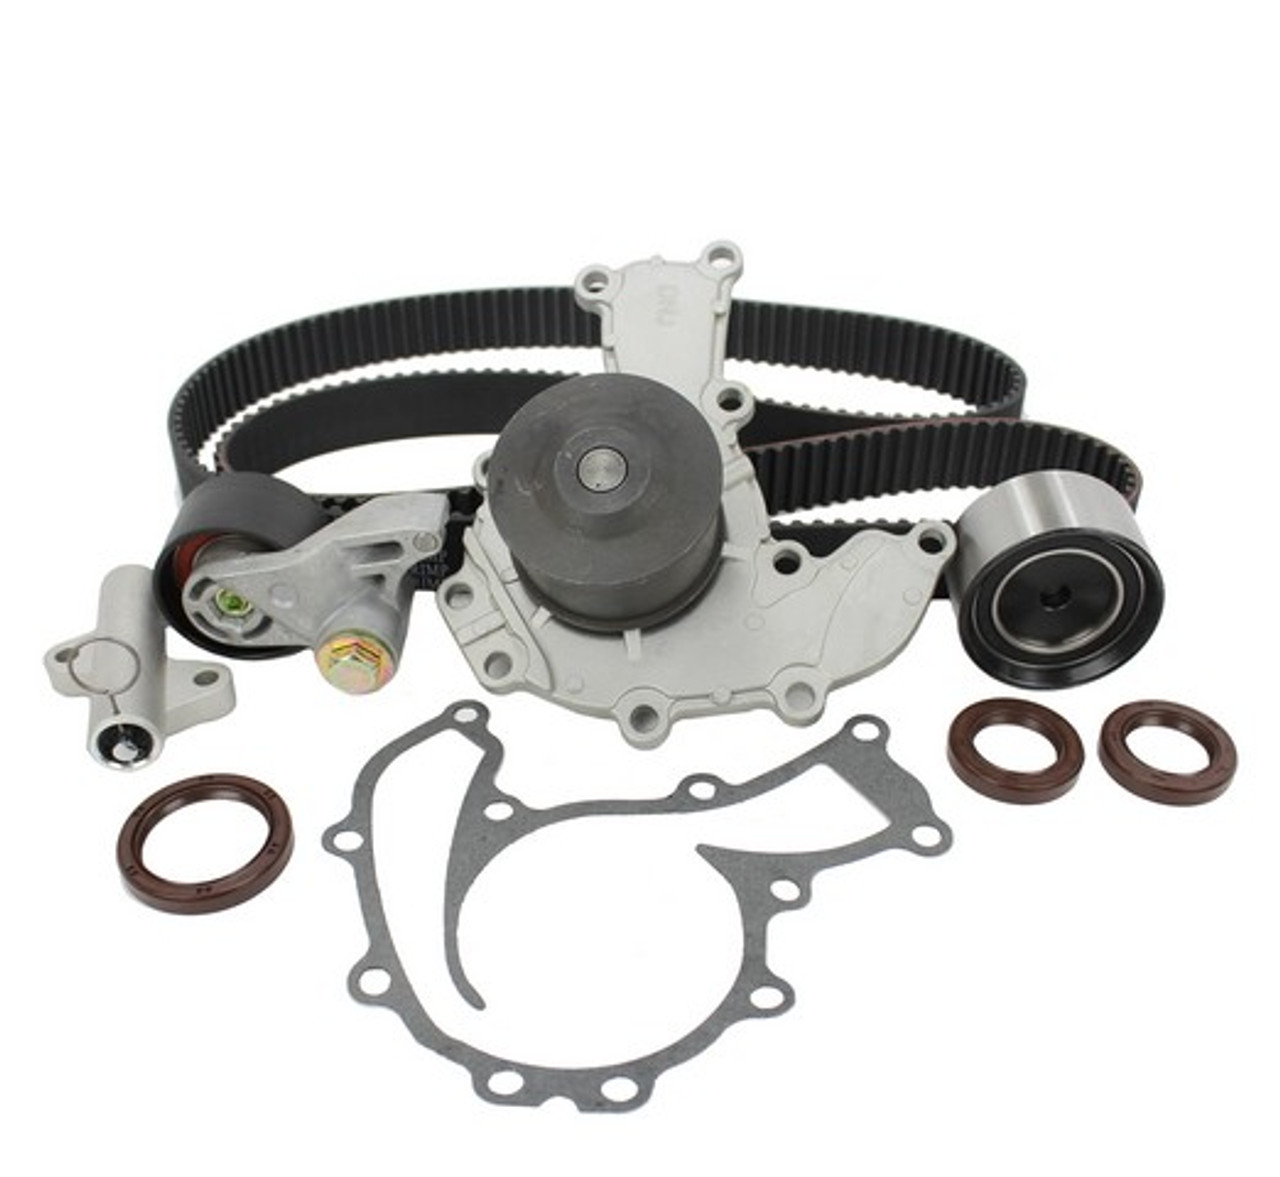 Timing Belt Kit with Water Pump 3.2L 1997 Acura SLX - TBK351WP.2